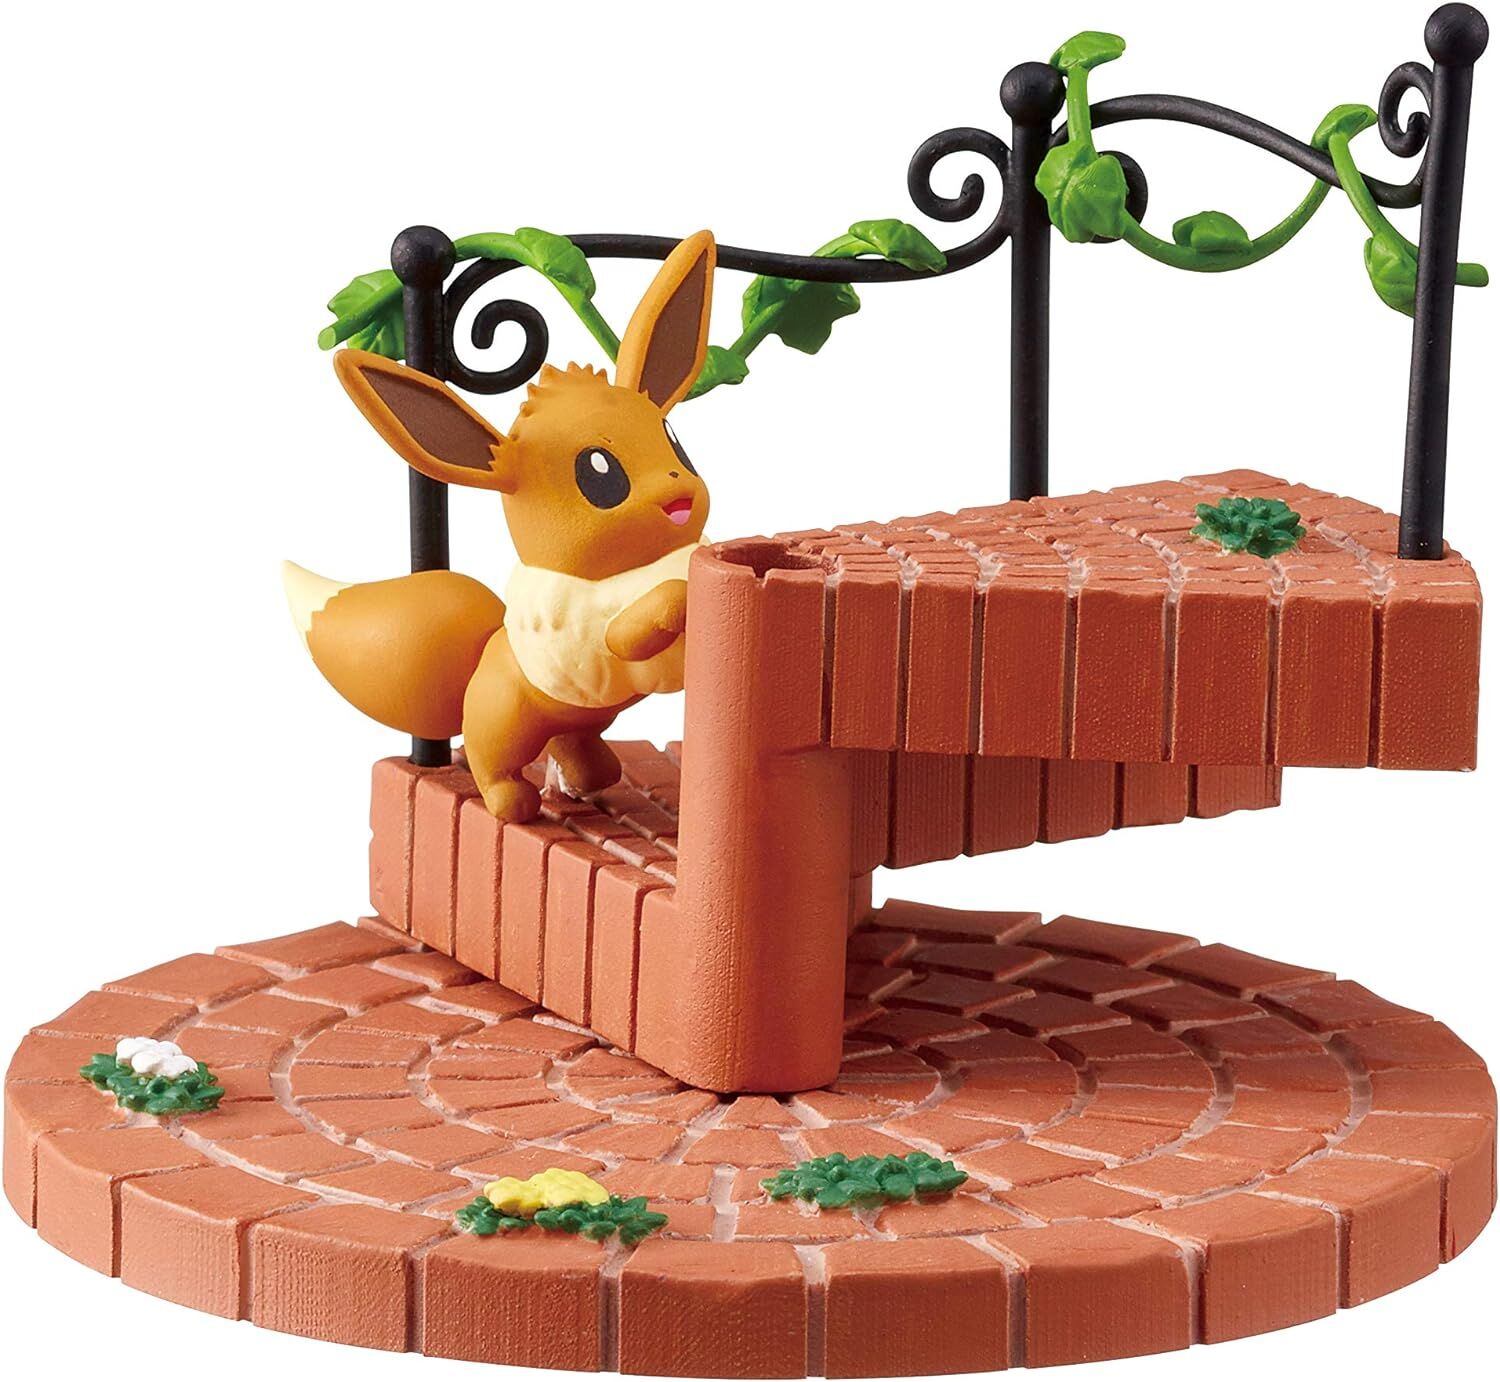 Re-Ment Pokemon Staircase Complete Set (Box Set of 6)